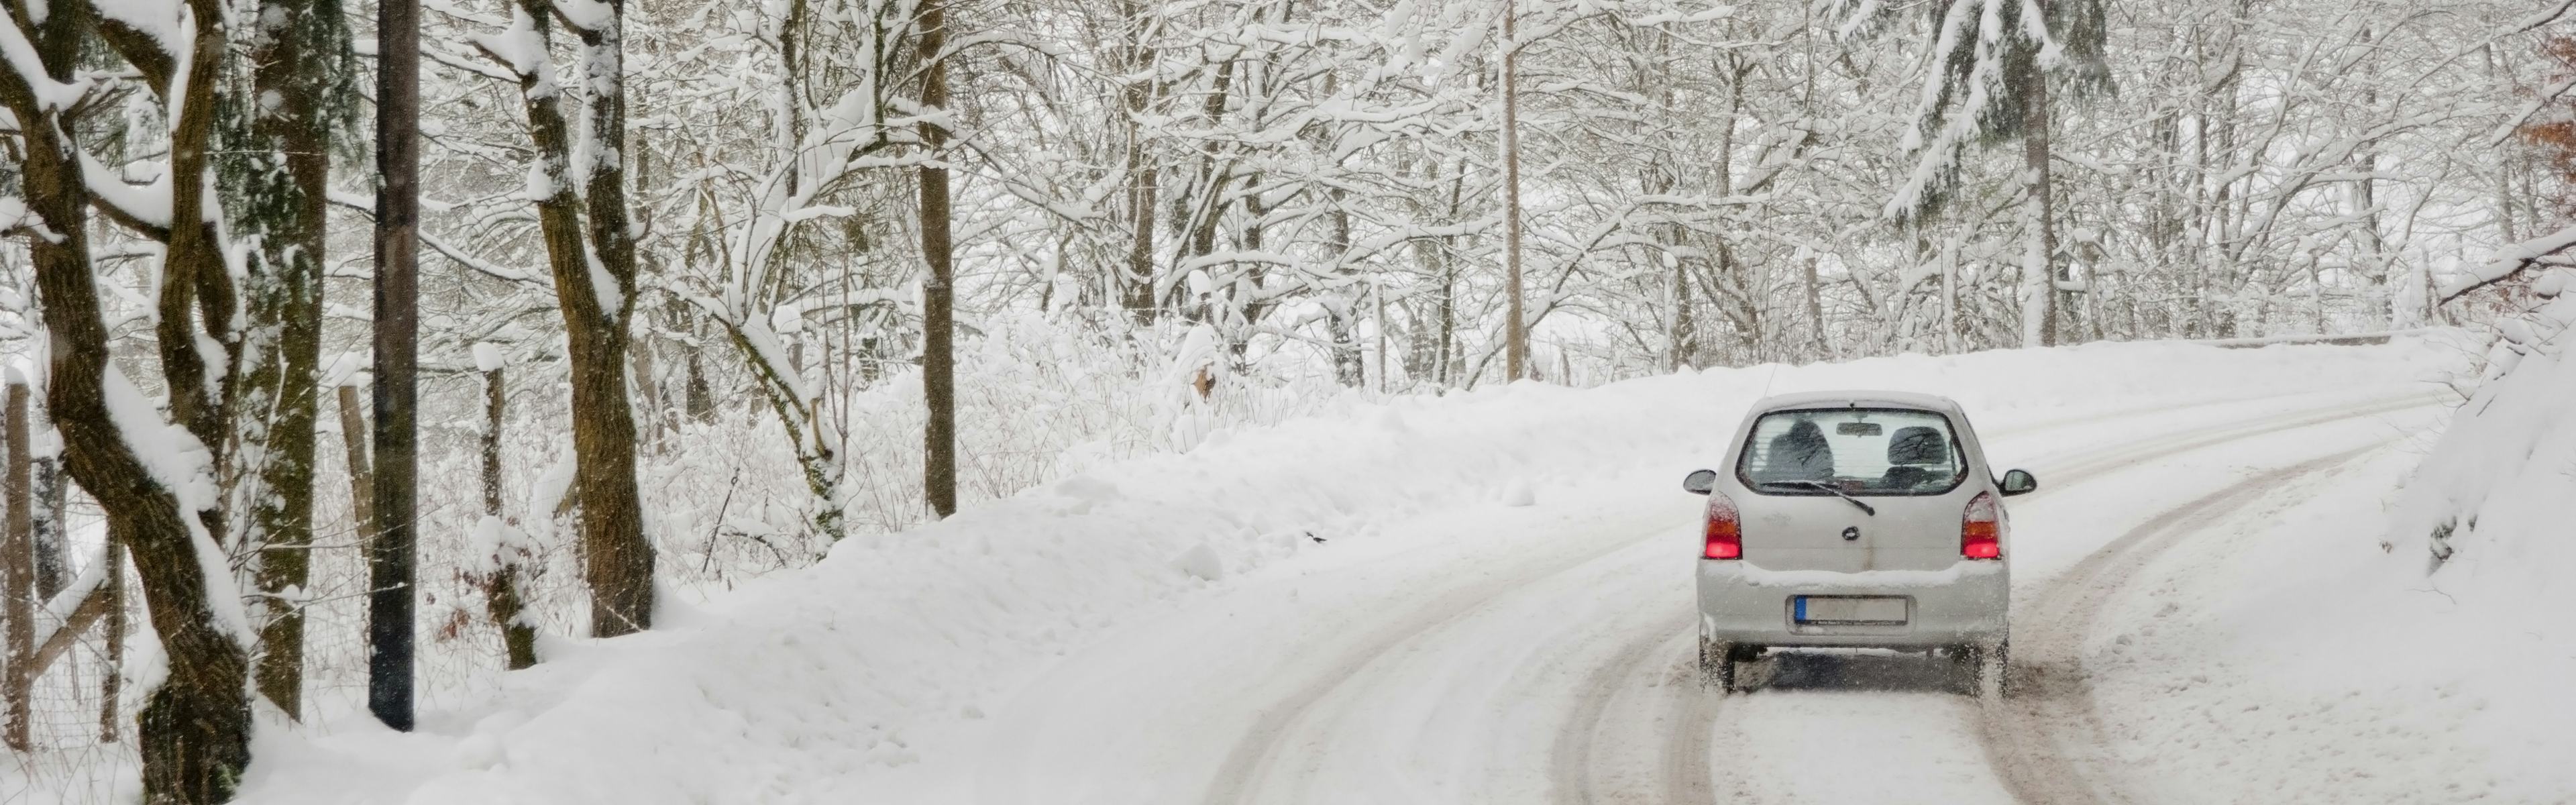 car driving on a winter road in forest. Winter driving can be challenging, luckily CAA is here to help.